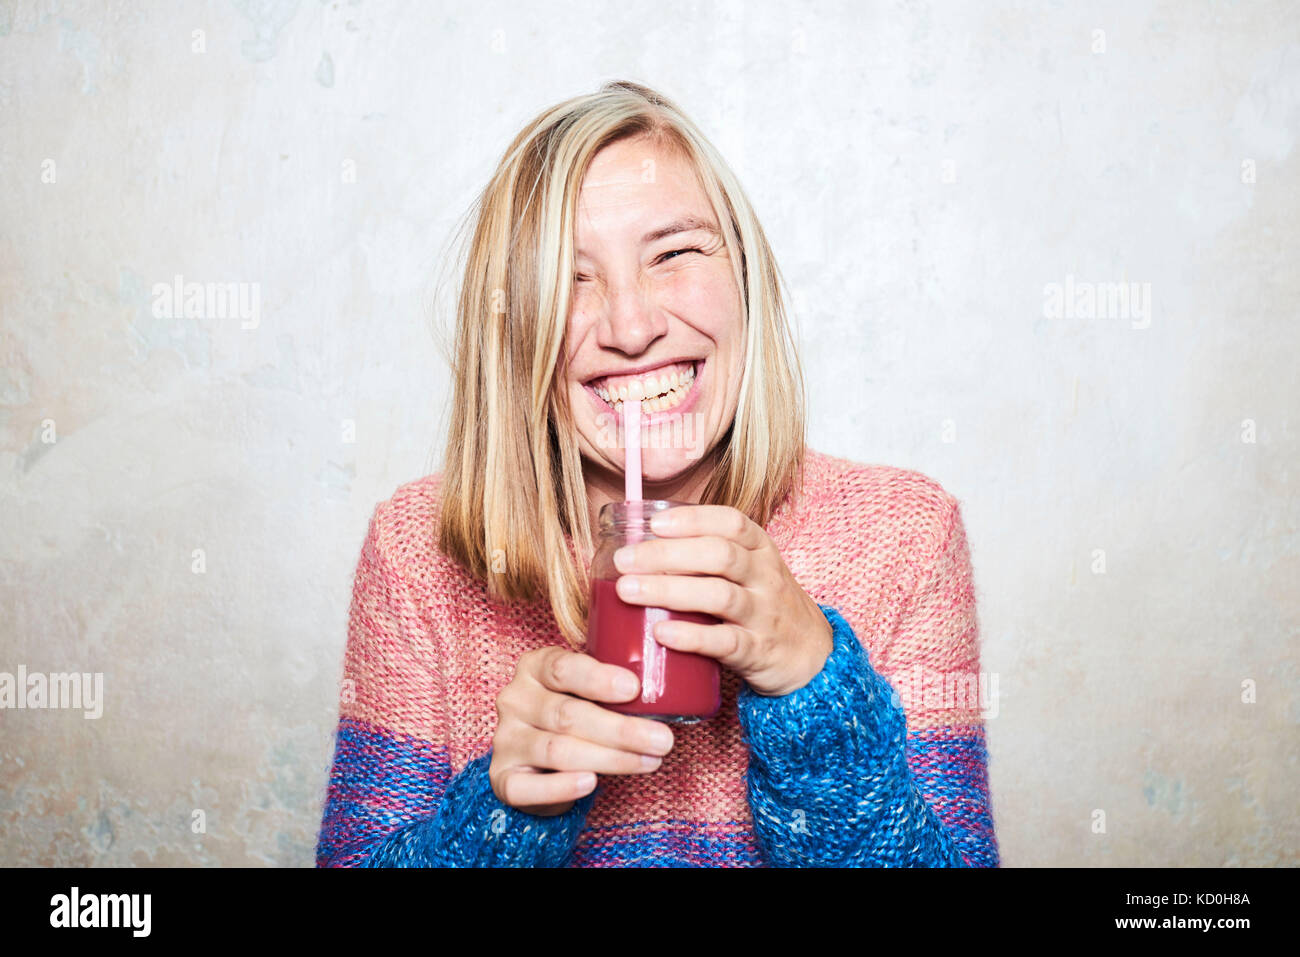 Portrait of woman drinking smoothie, smiling Stock Photo